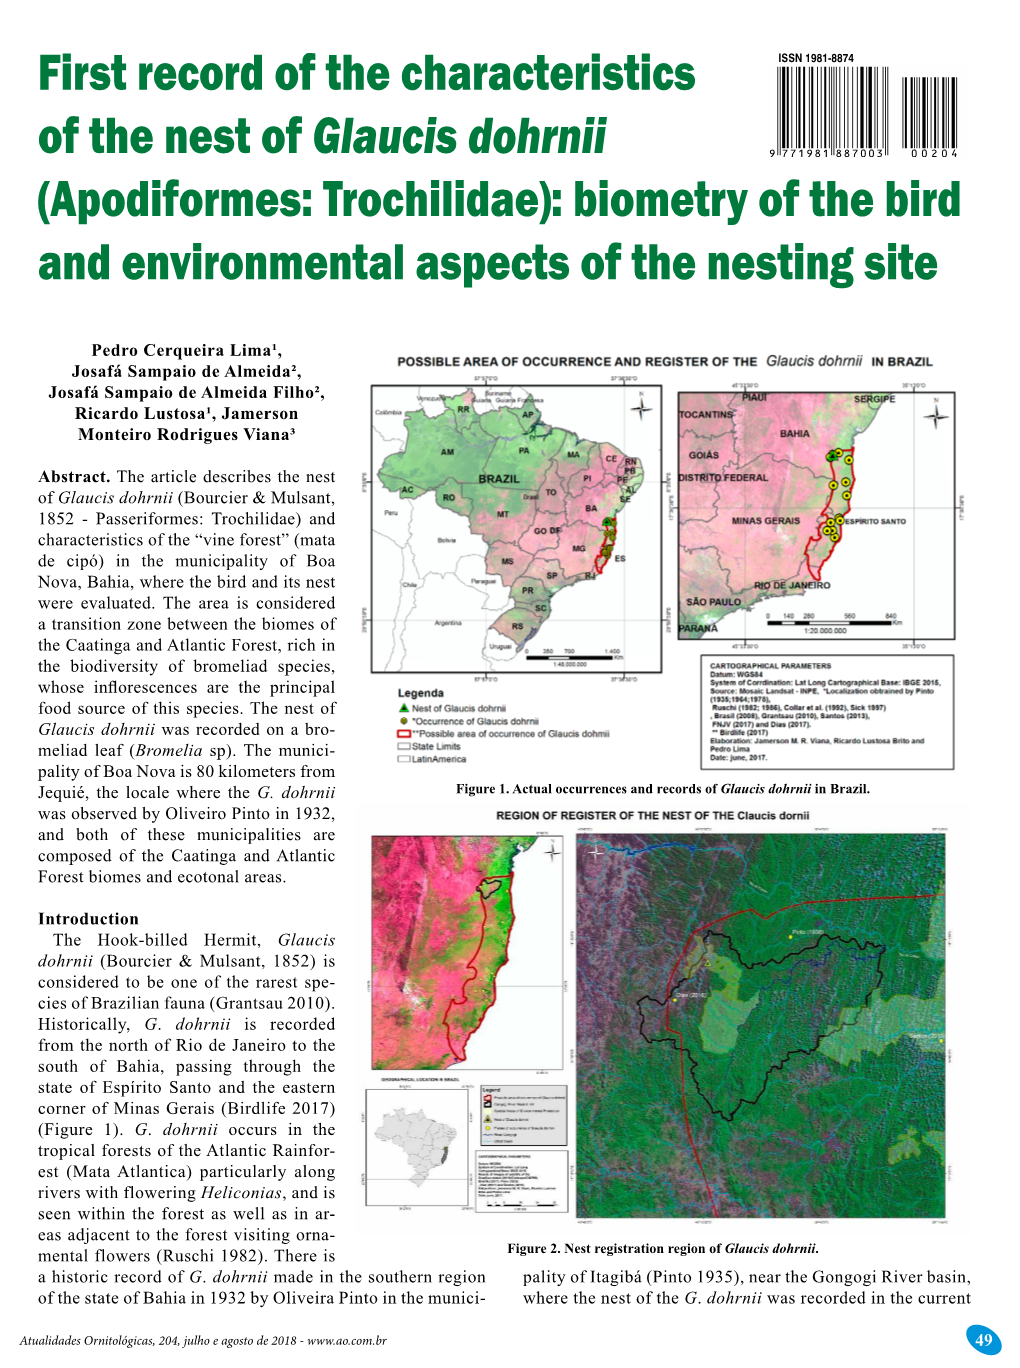 First Record of the Characteristics of the Nest of Glaucis Dohrnii (Apodiformes: Trochilidae): Biometry of the Bird and Environmental Aspects of the Nesting Site